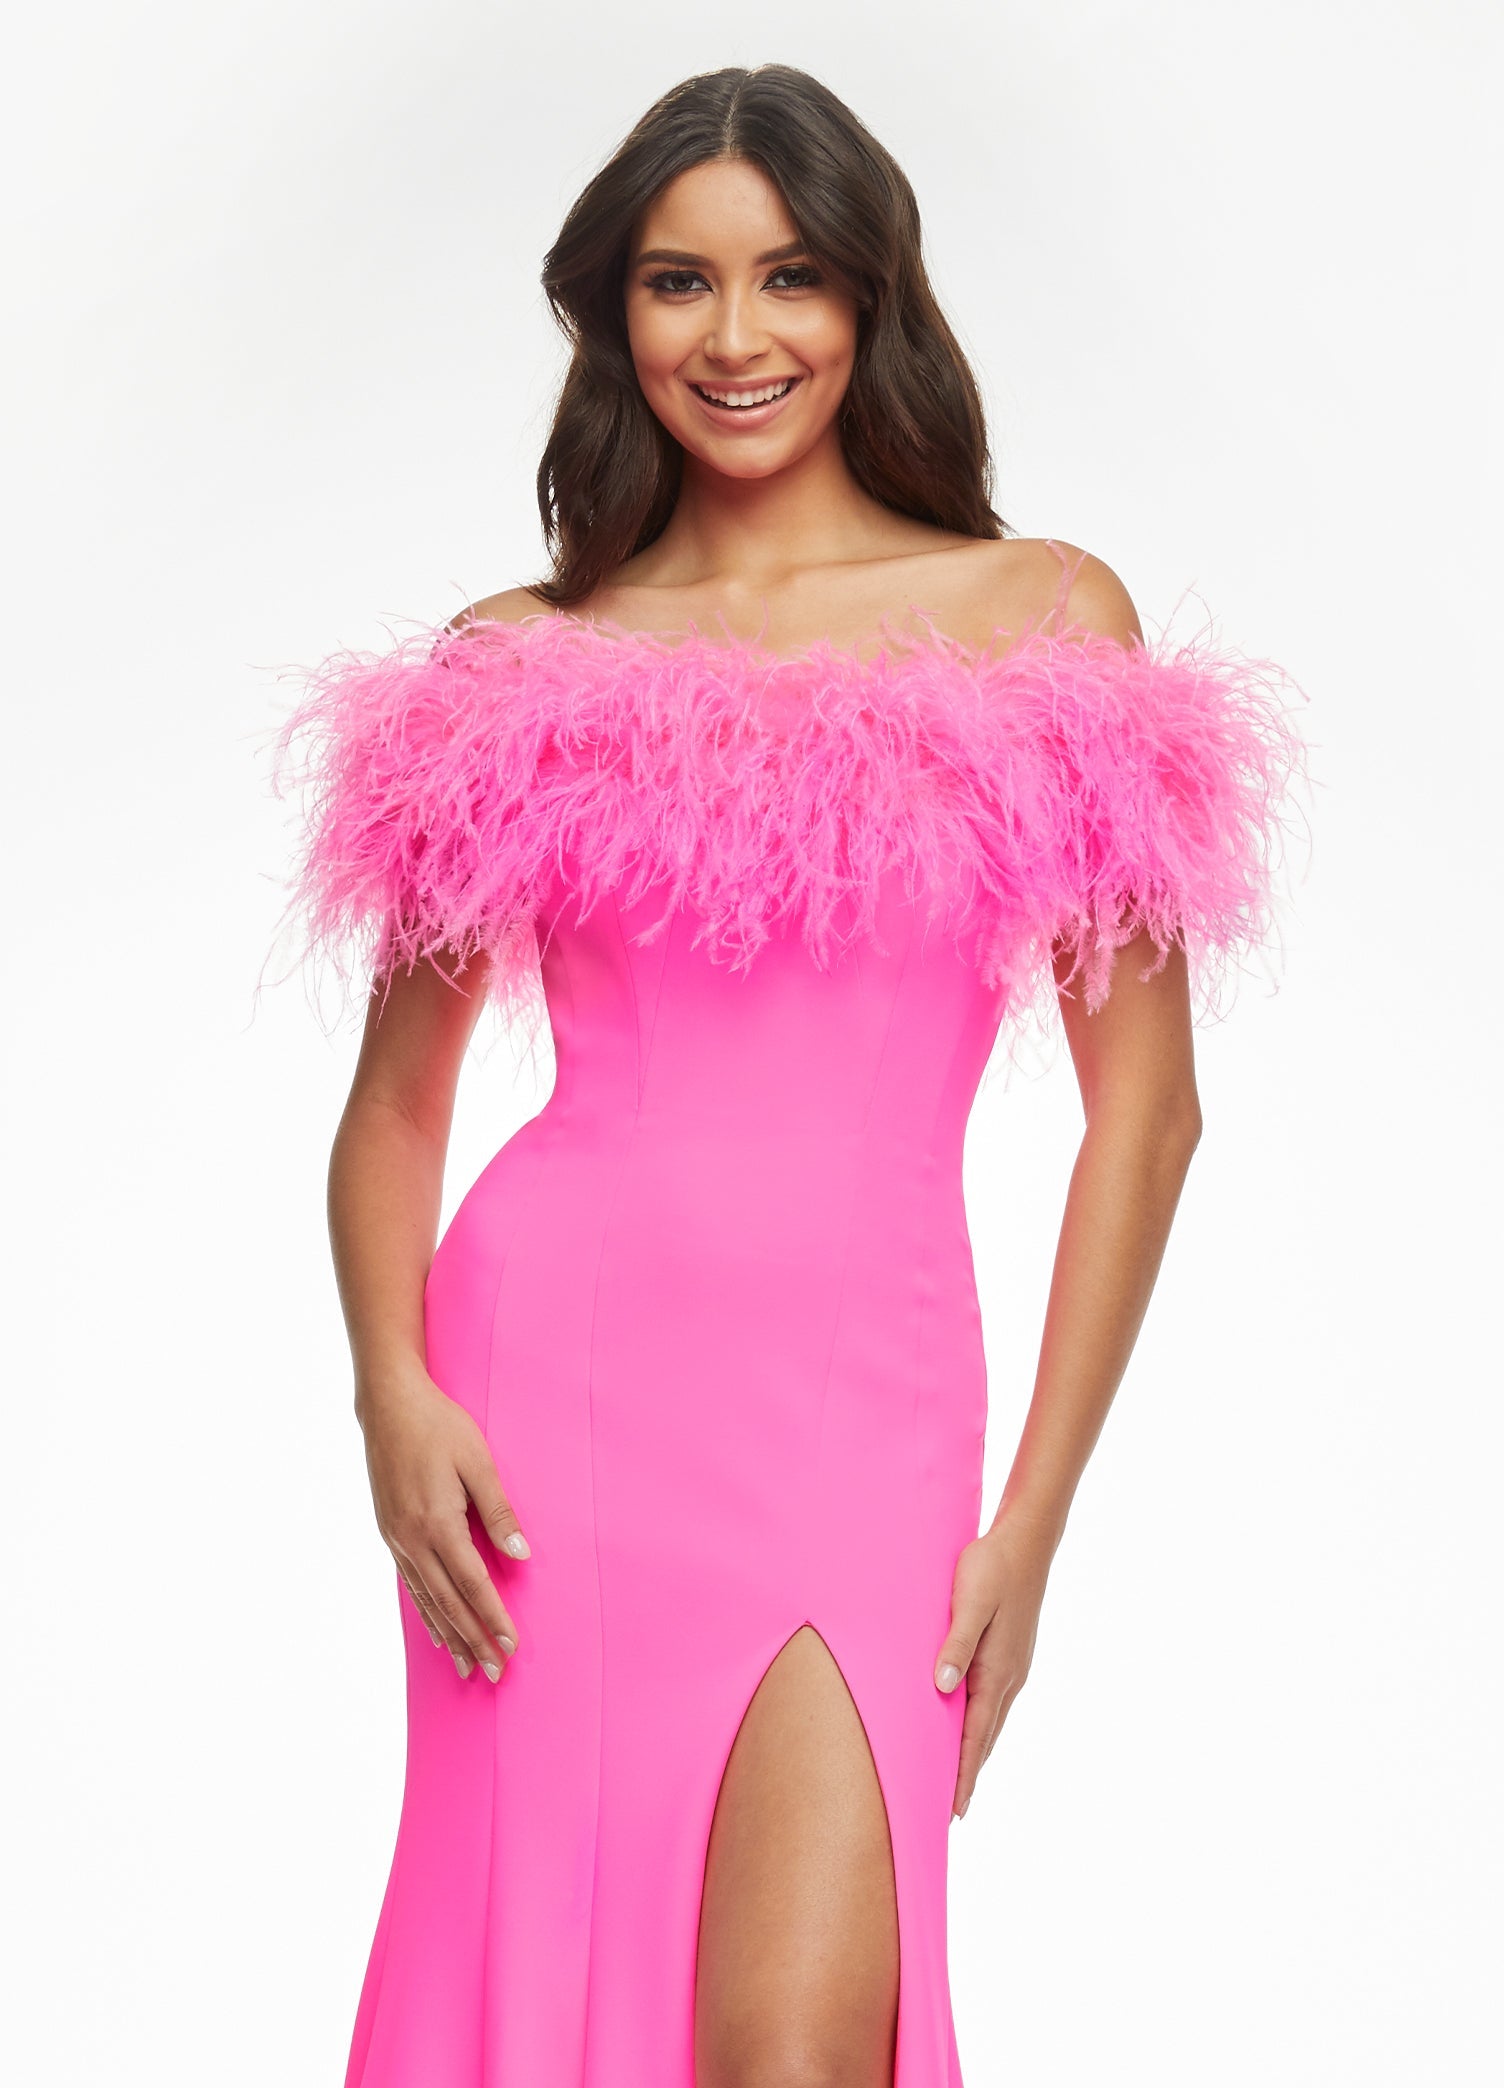 pink dress with feathers